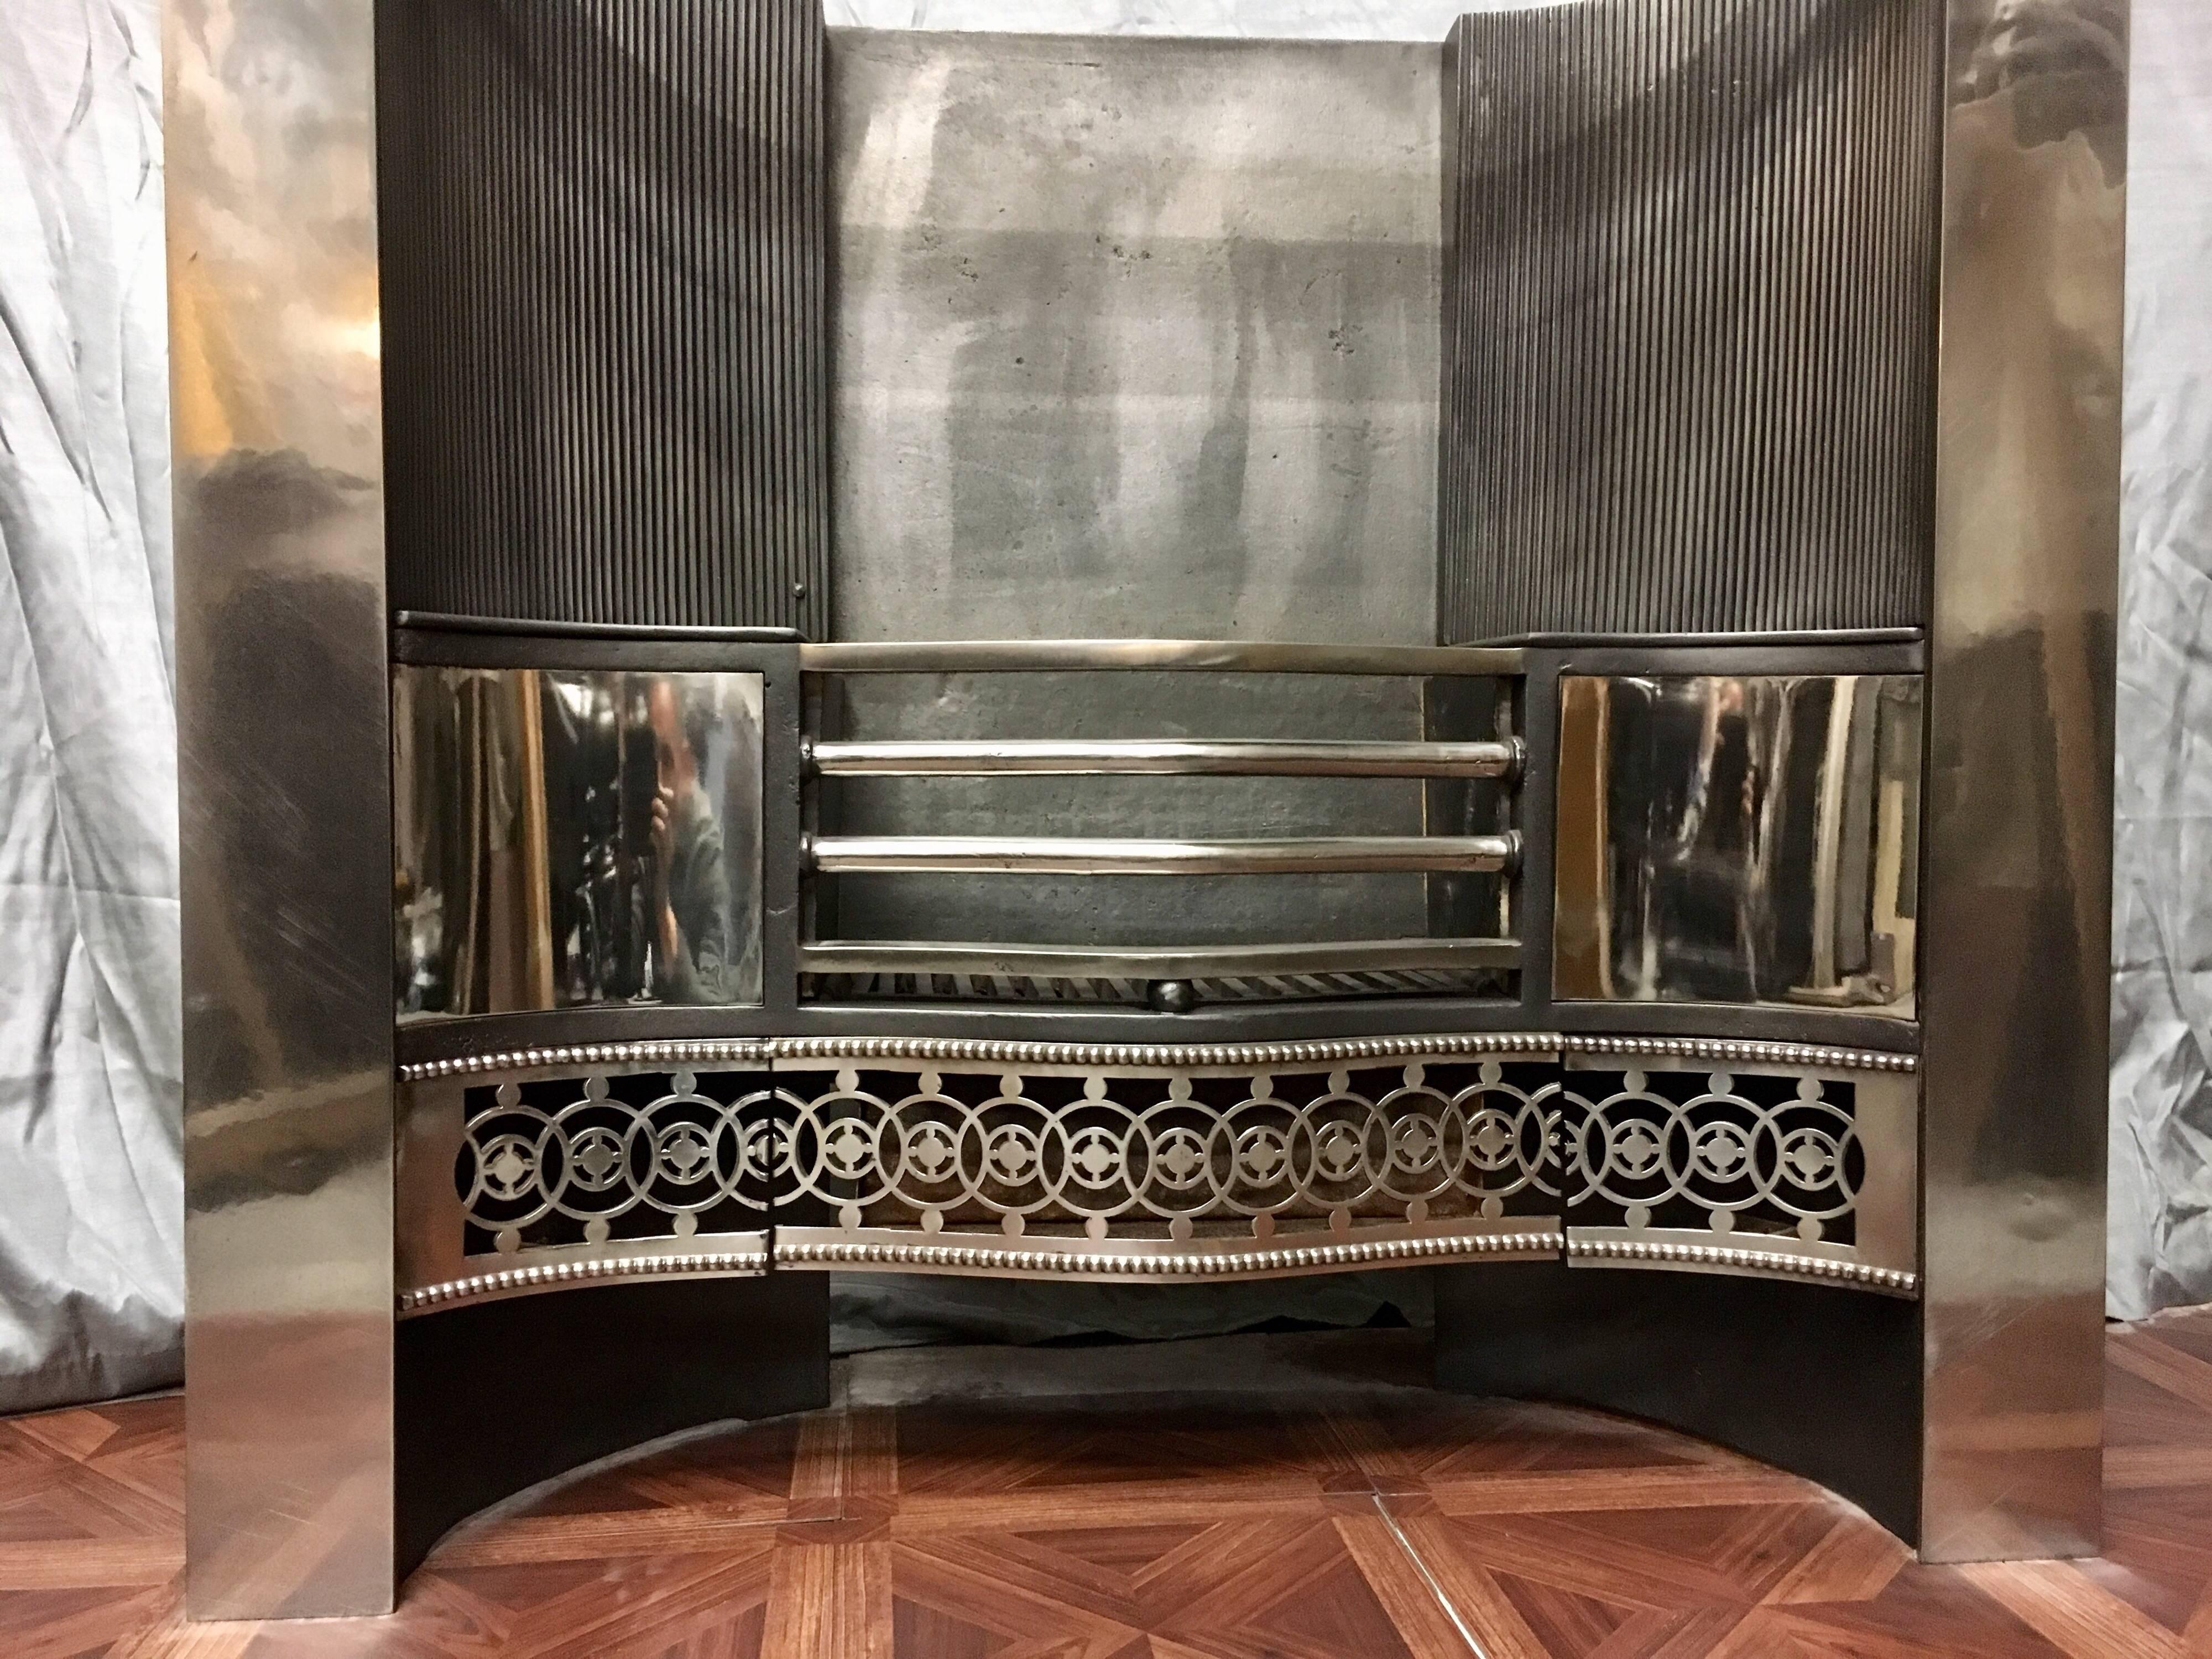 A fully restored and polished antique 19th century cast iron Georgian fire place insert. A polished four barred serpentine grate flanked by convex side panels above a serpentine pierced apron of linked circles framed by repeating gadrooned balls. A